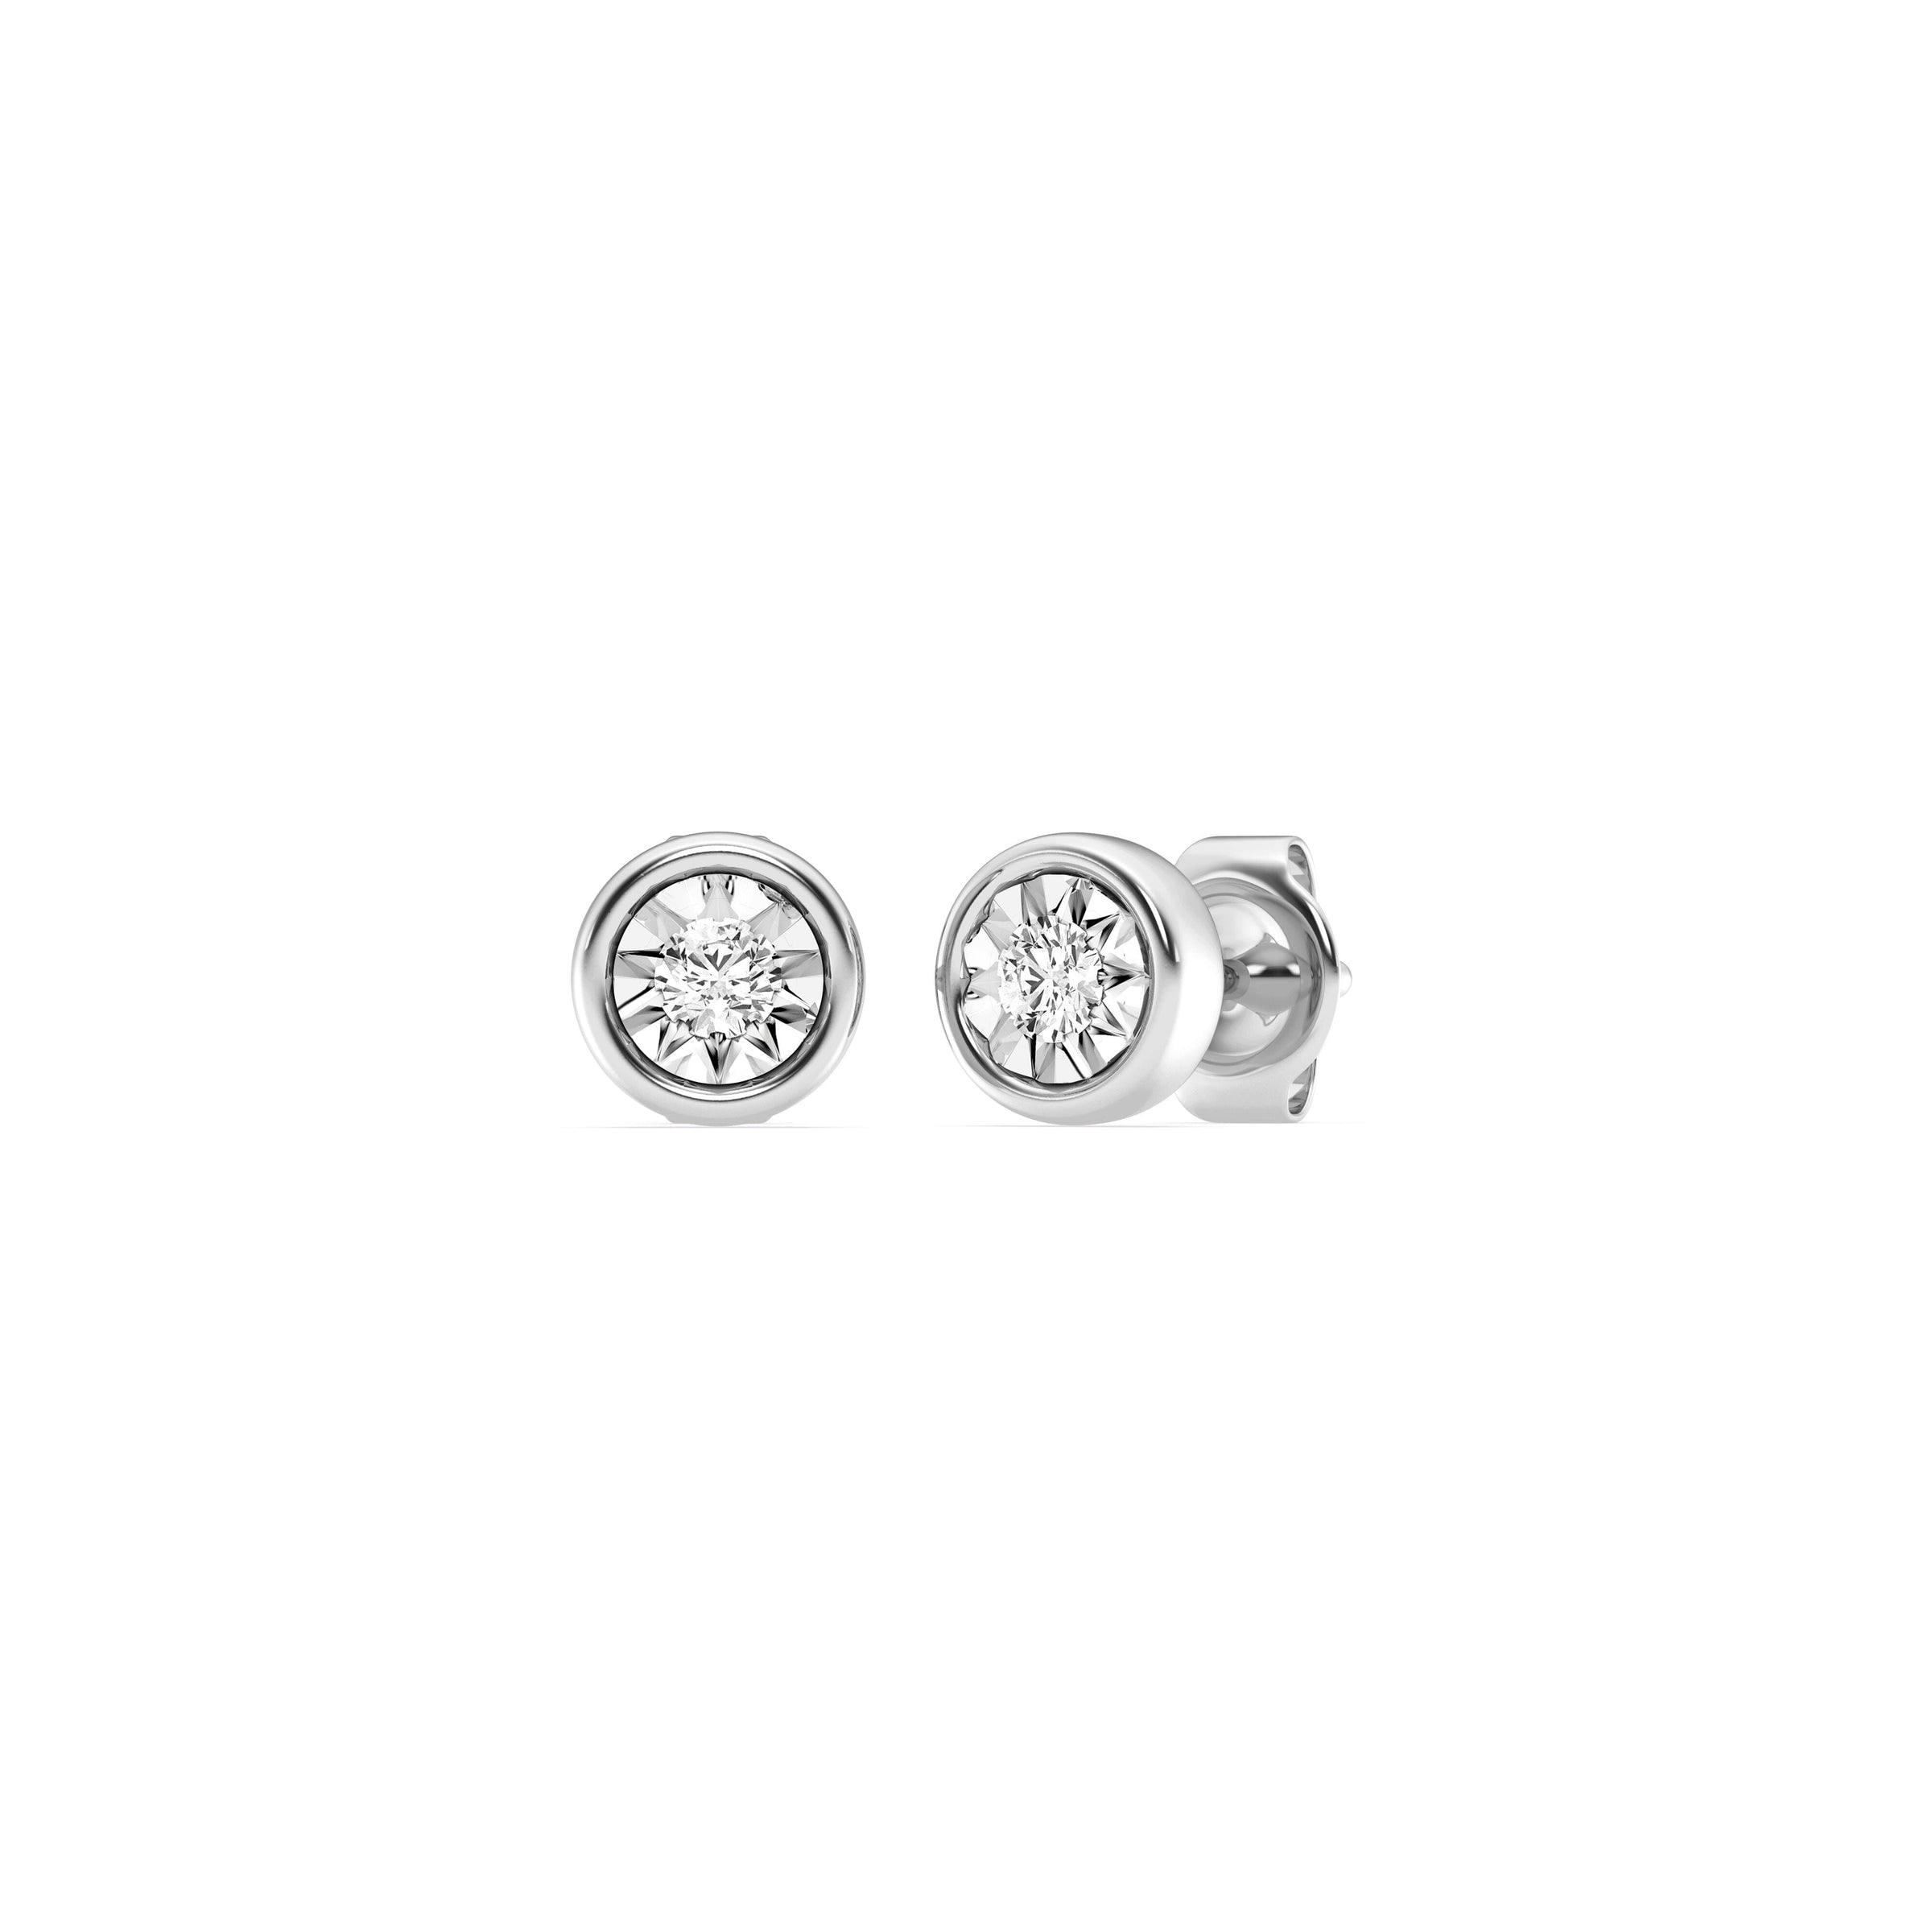 Mirage Stud Earrings with 0.20ct of Laboratory Grown Diamonds in Sterling Silver and Platinum Earrings Bevilles 